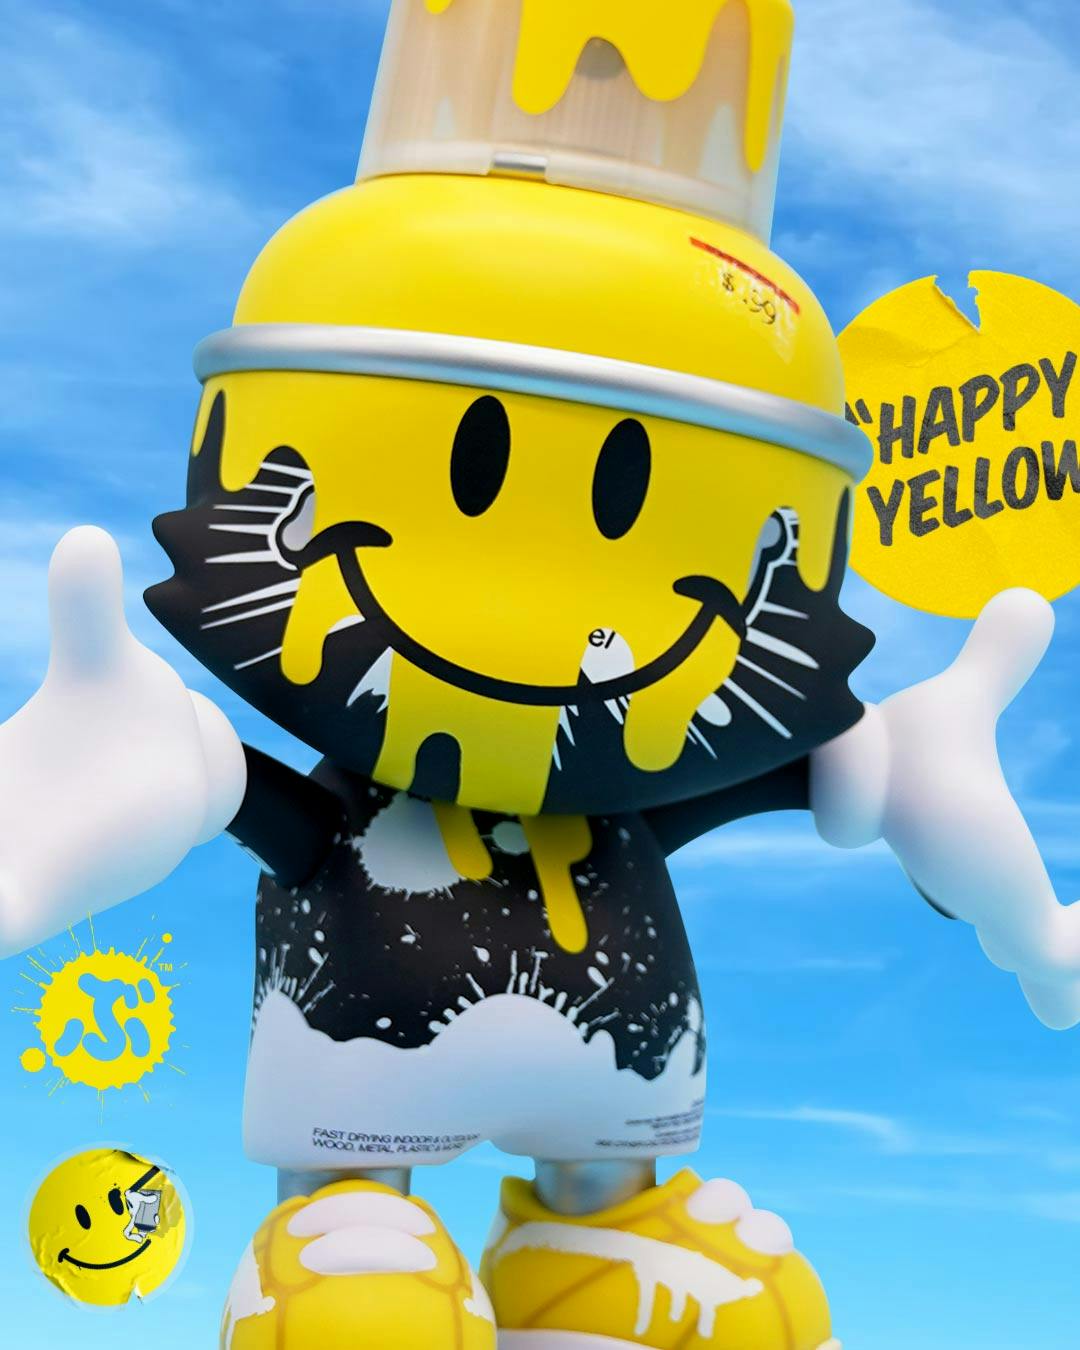 HAPPY YELLOW BY OG SLICK